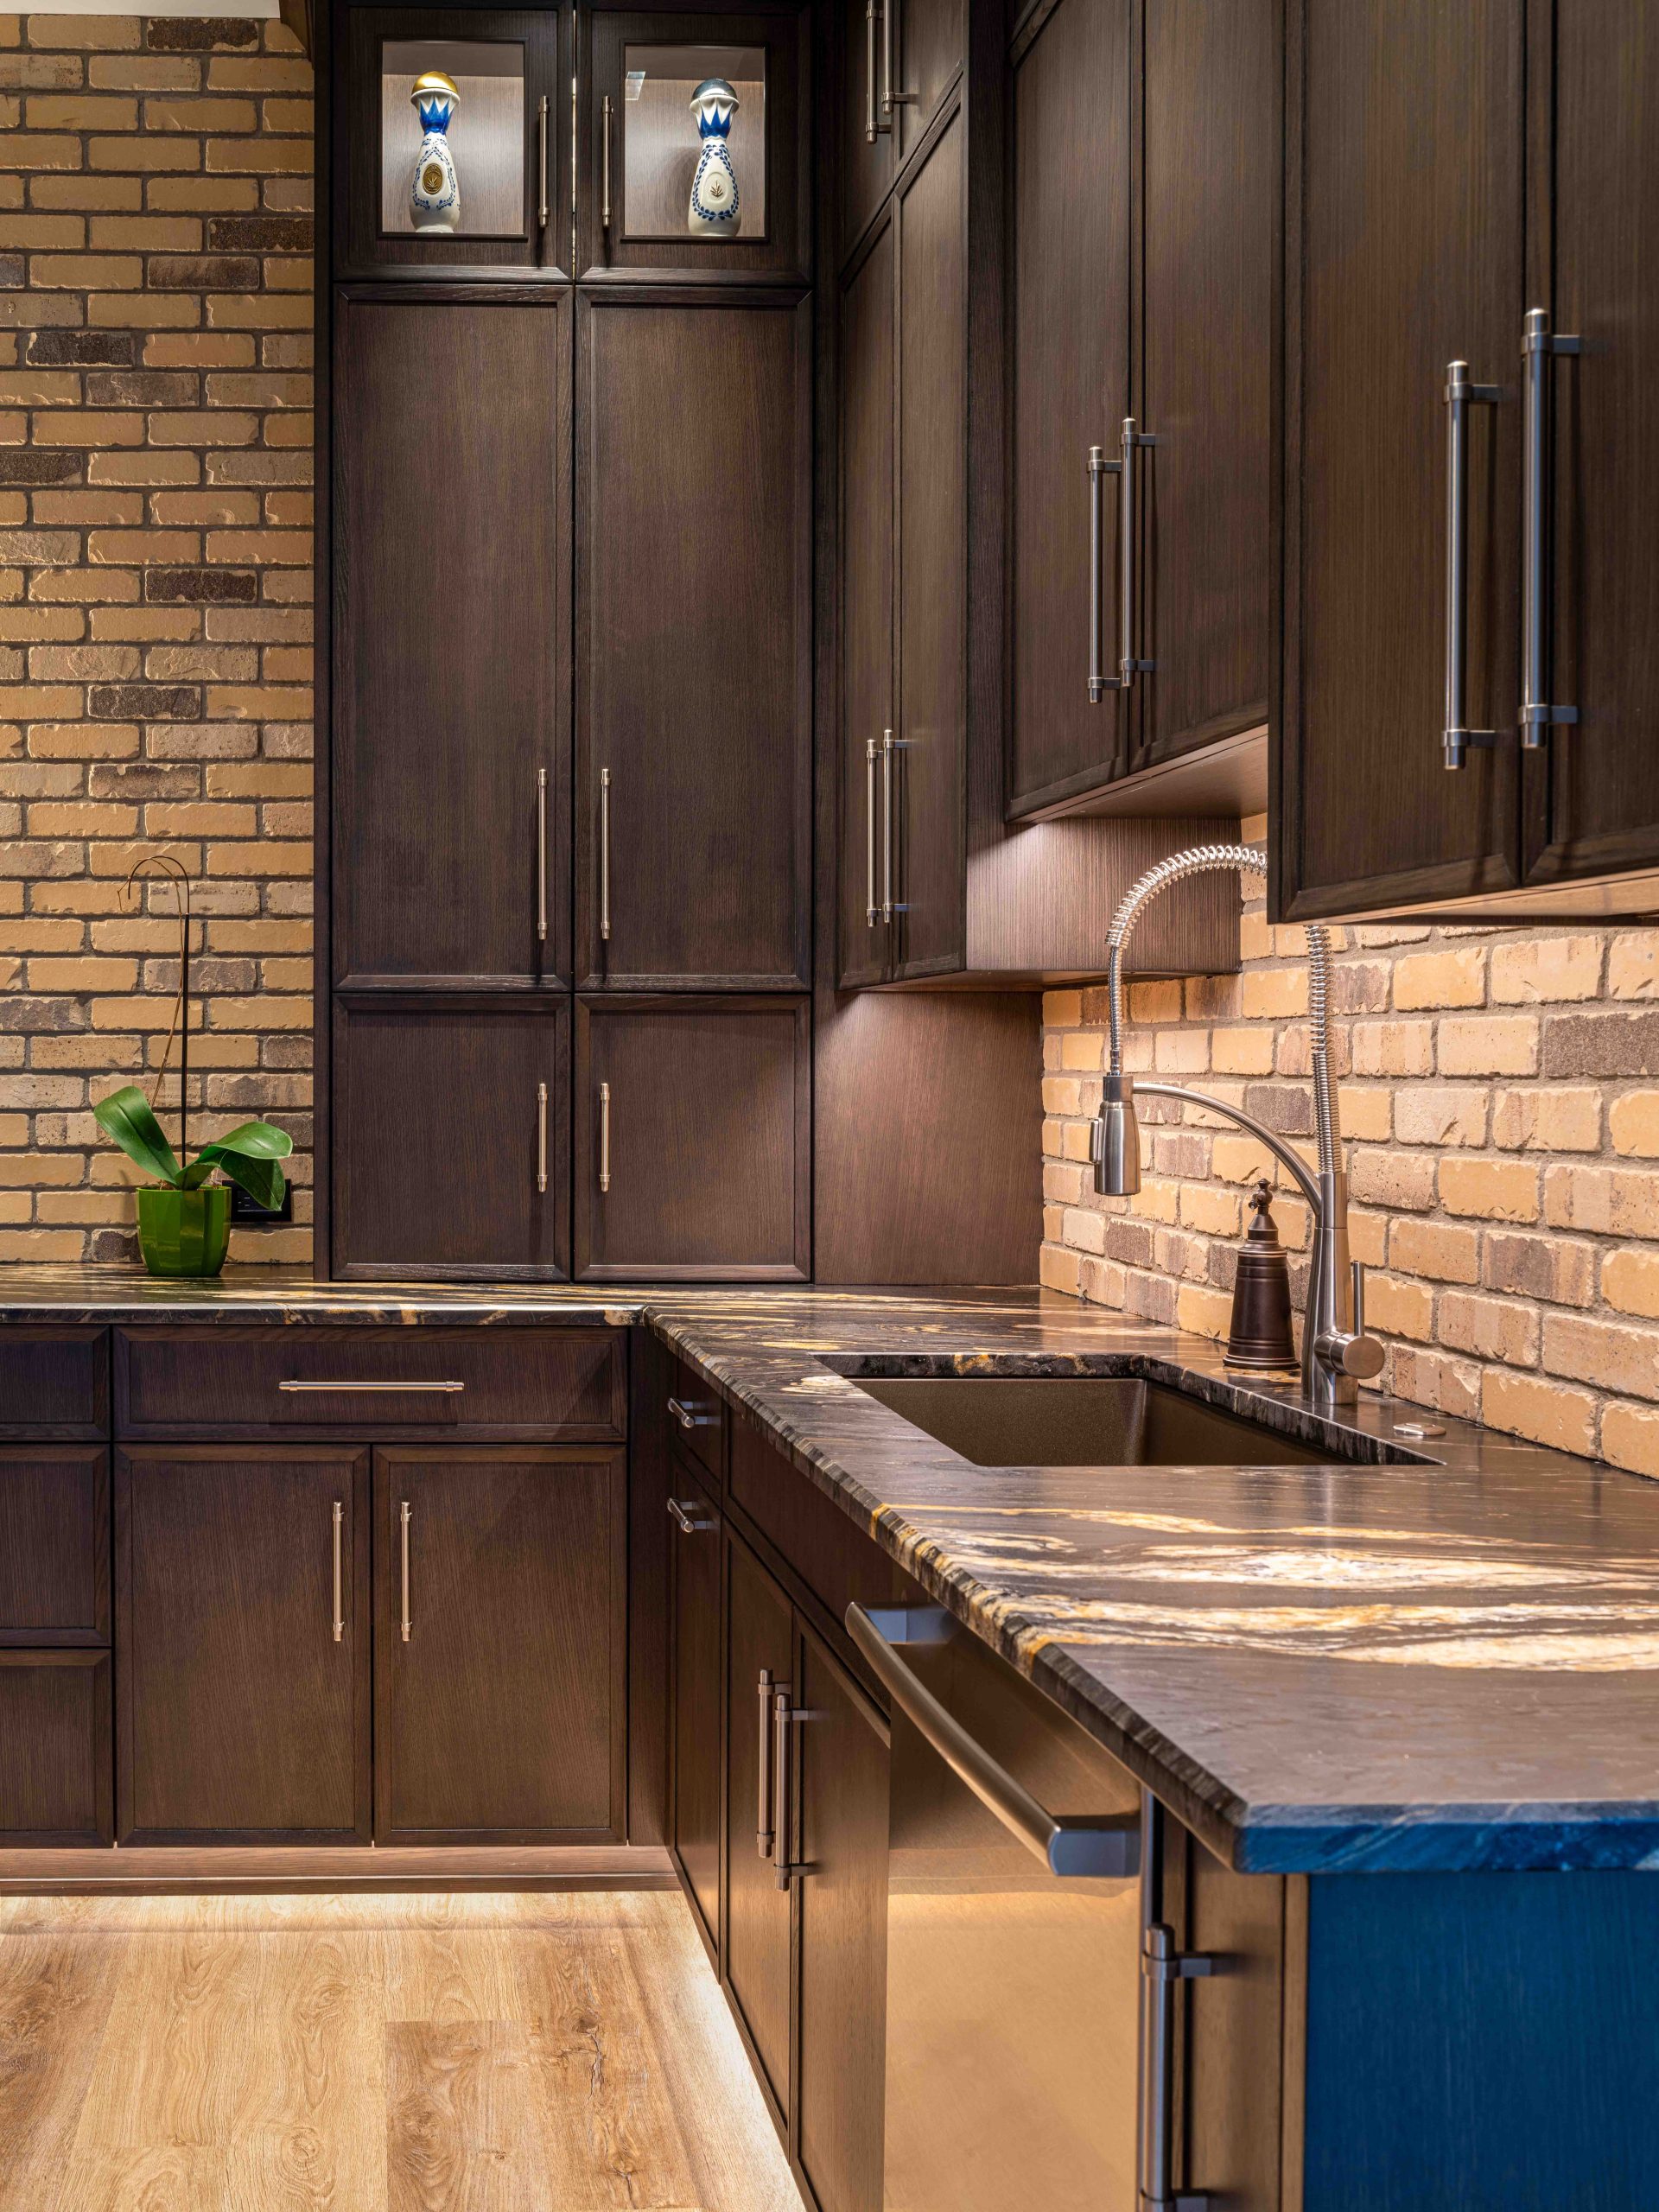 Wooden kitchen cabinets with black countertops